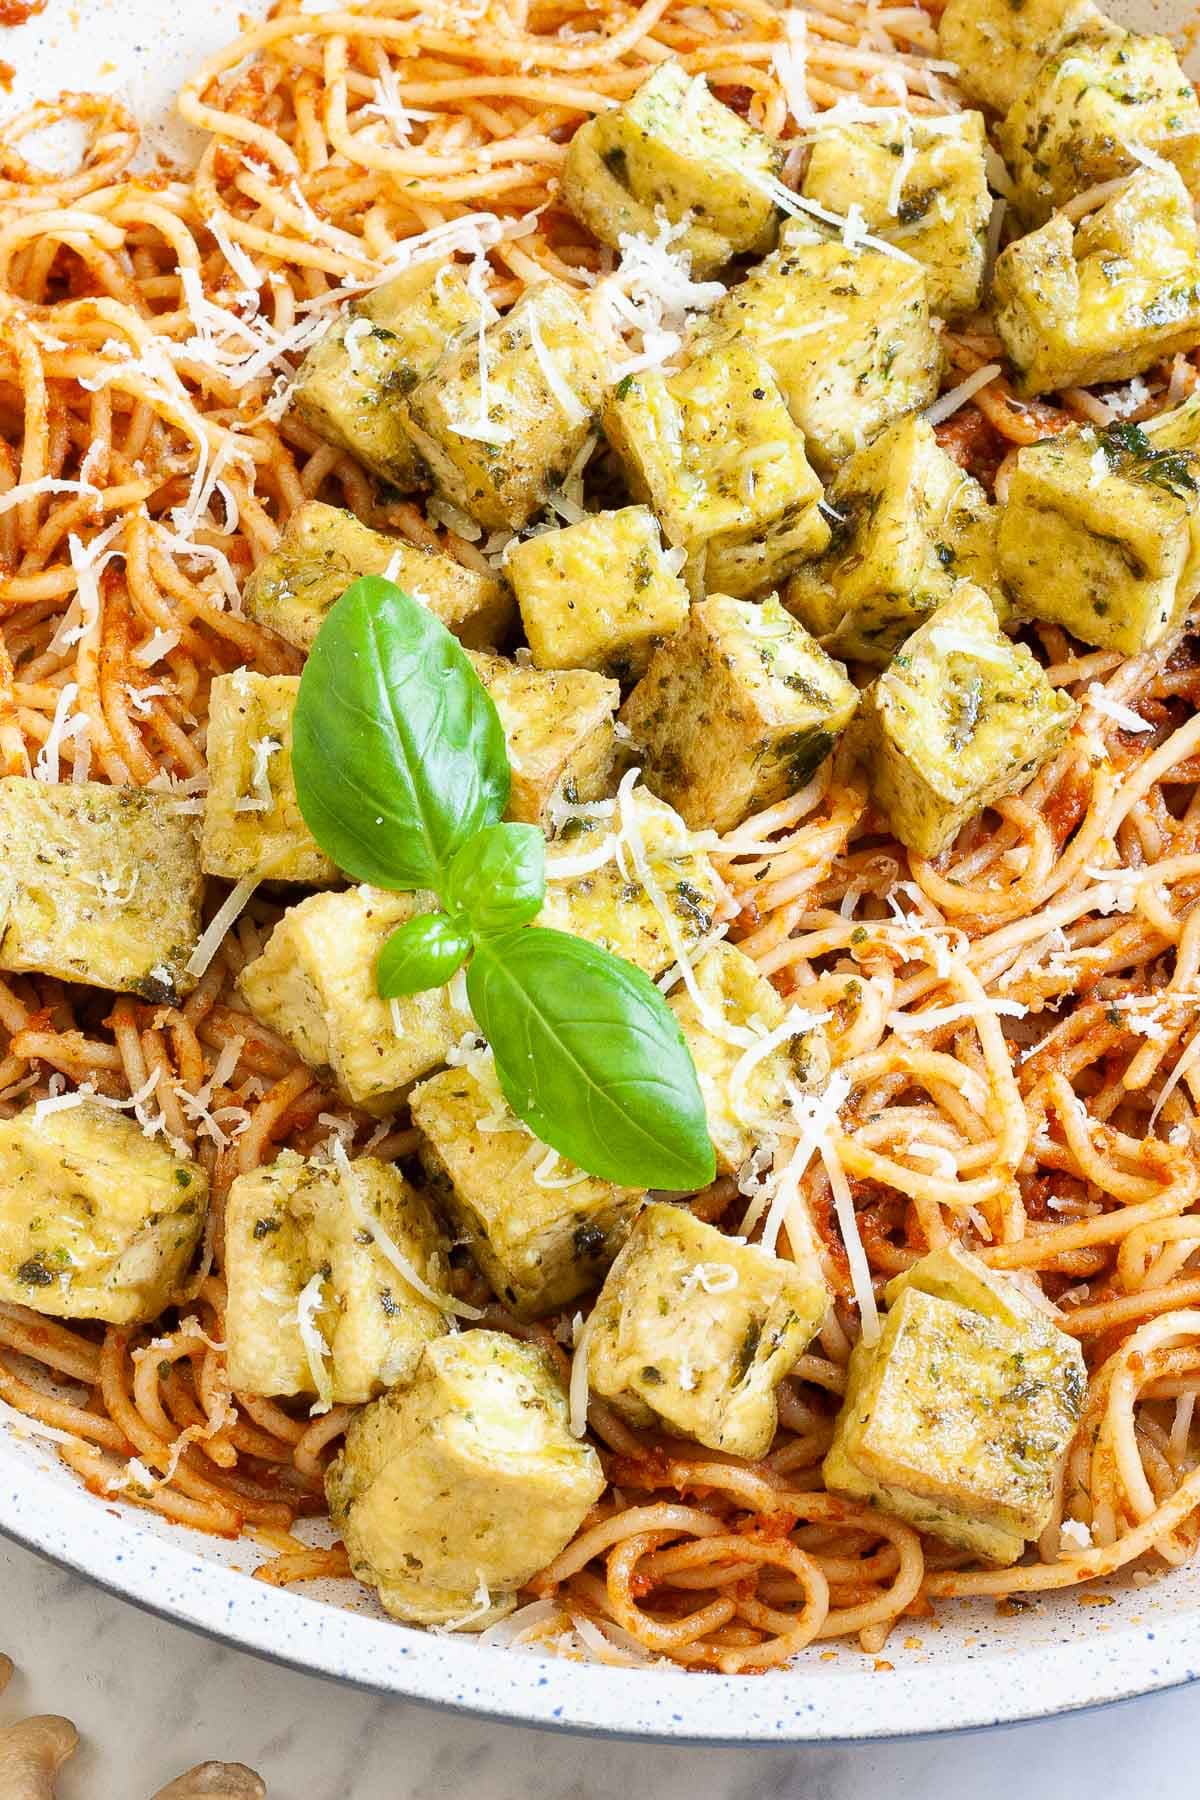 Large white frying pan with red pesto spaghetti topped with green-yellow tofu cubes, shredded cheese and basil leaves.